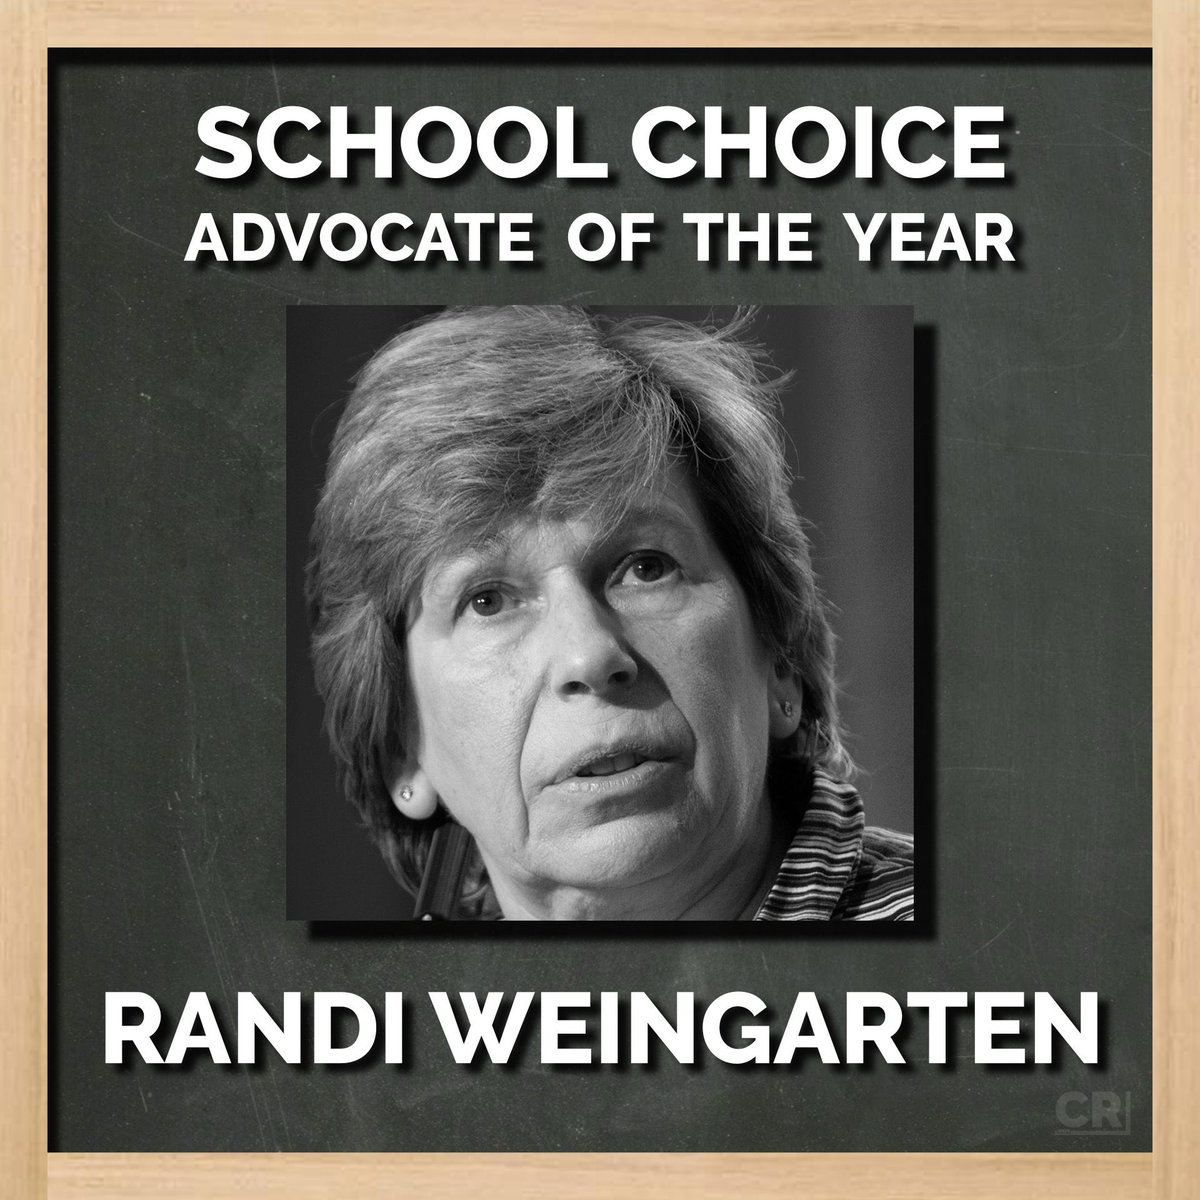 @DeAngelisCorey @rweingarten She’s won this award so many years in a row, they now call this award, The Randi.